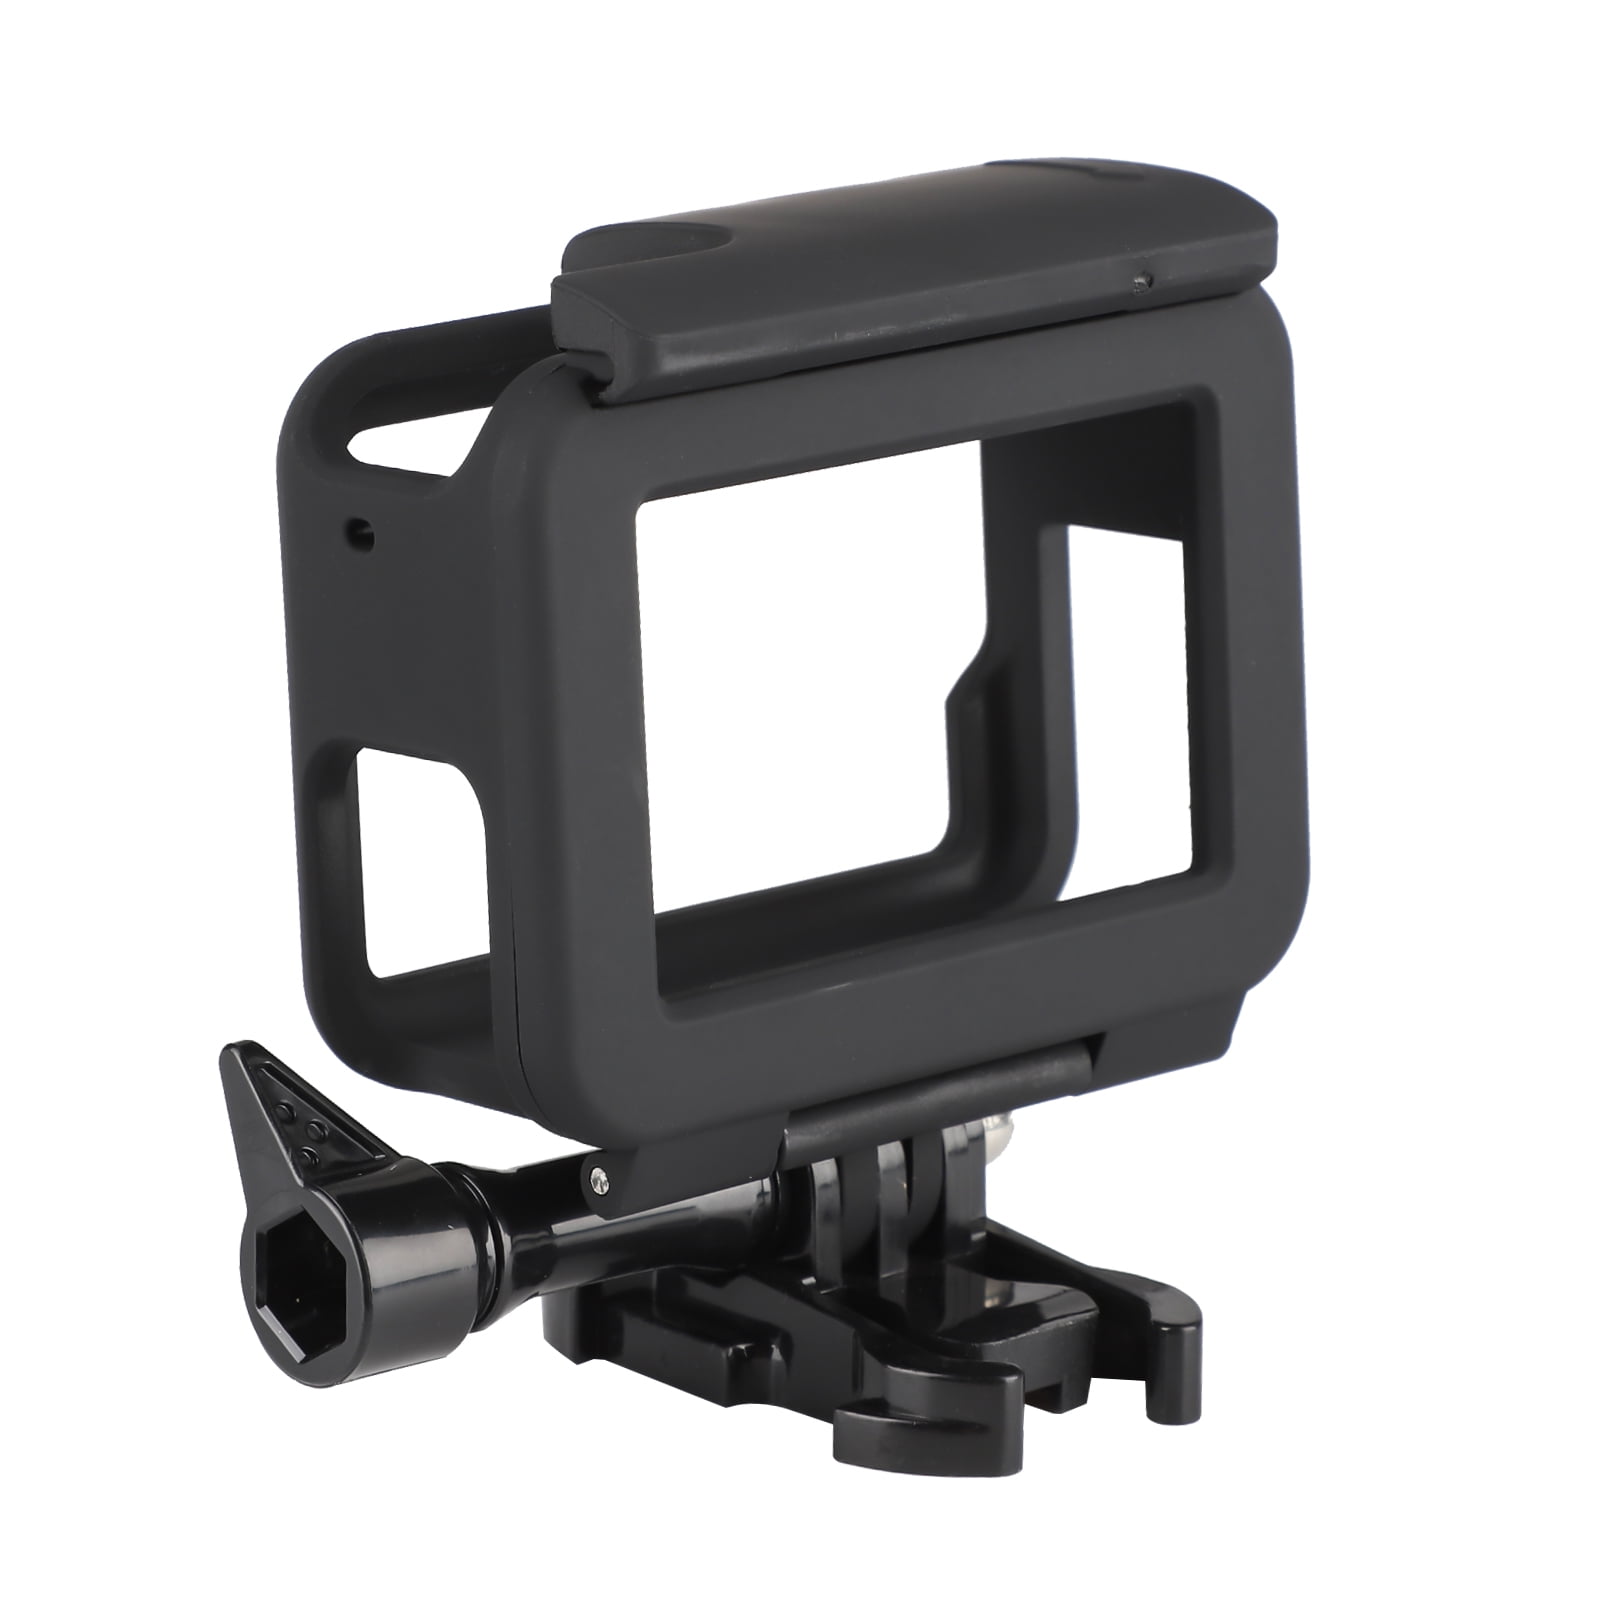 TSV Frame Mount Housing Case Fit for GoPro Hero 7, 6, 5, Hero (2018),  Protective Case with Accessories Quick Pull Movable Socket and Screw,  Compatible with GoPro Hero 7, 6, 5, Hero 2018 Cameras - Walmart.com